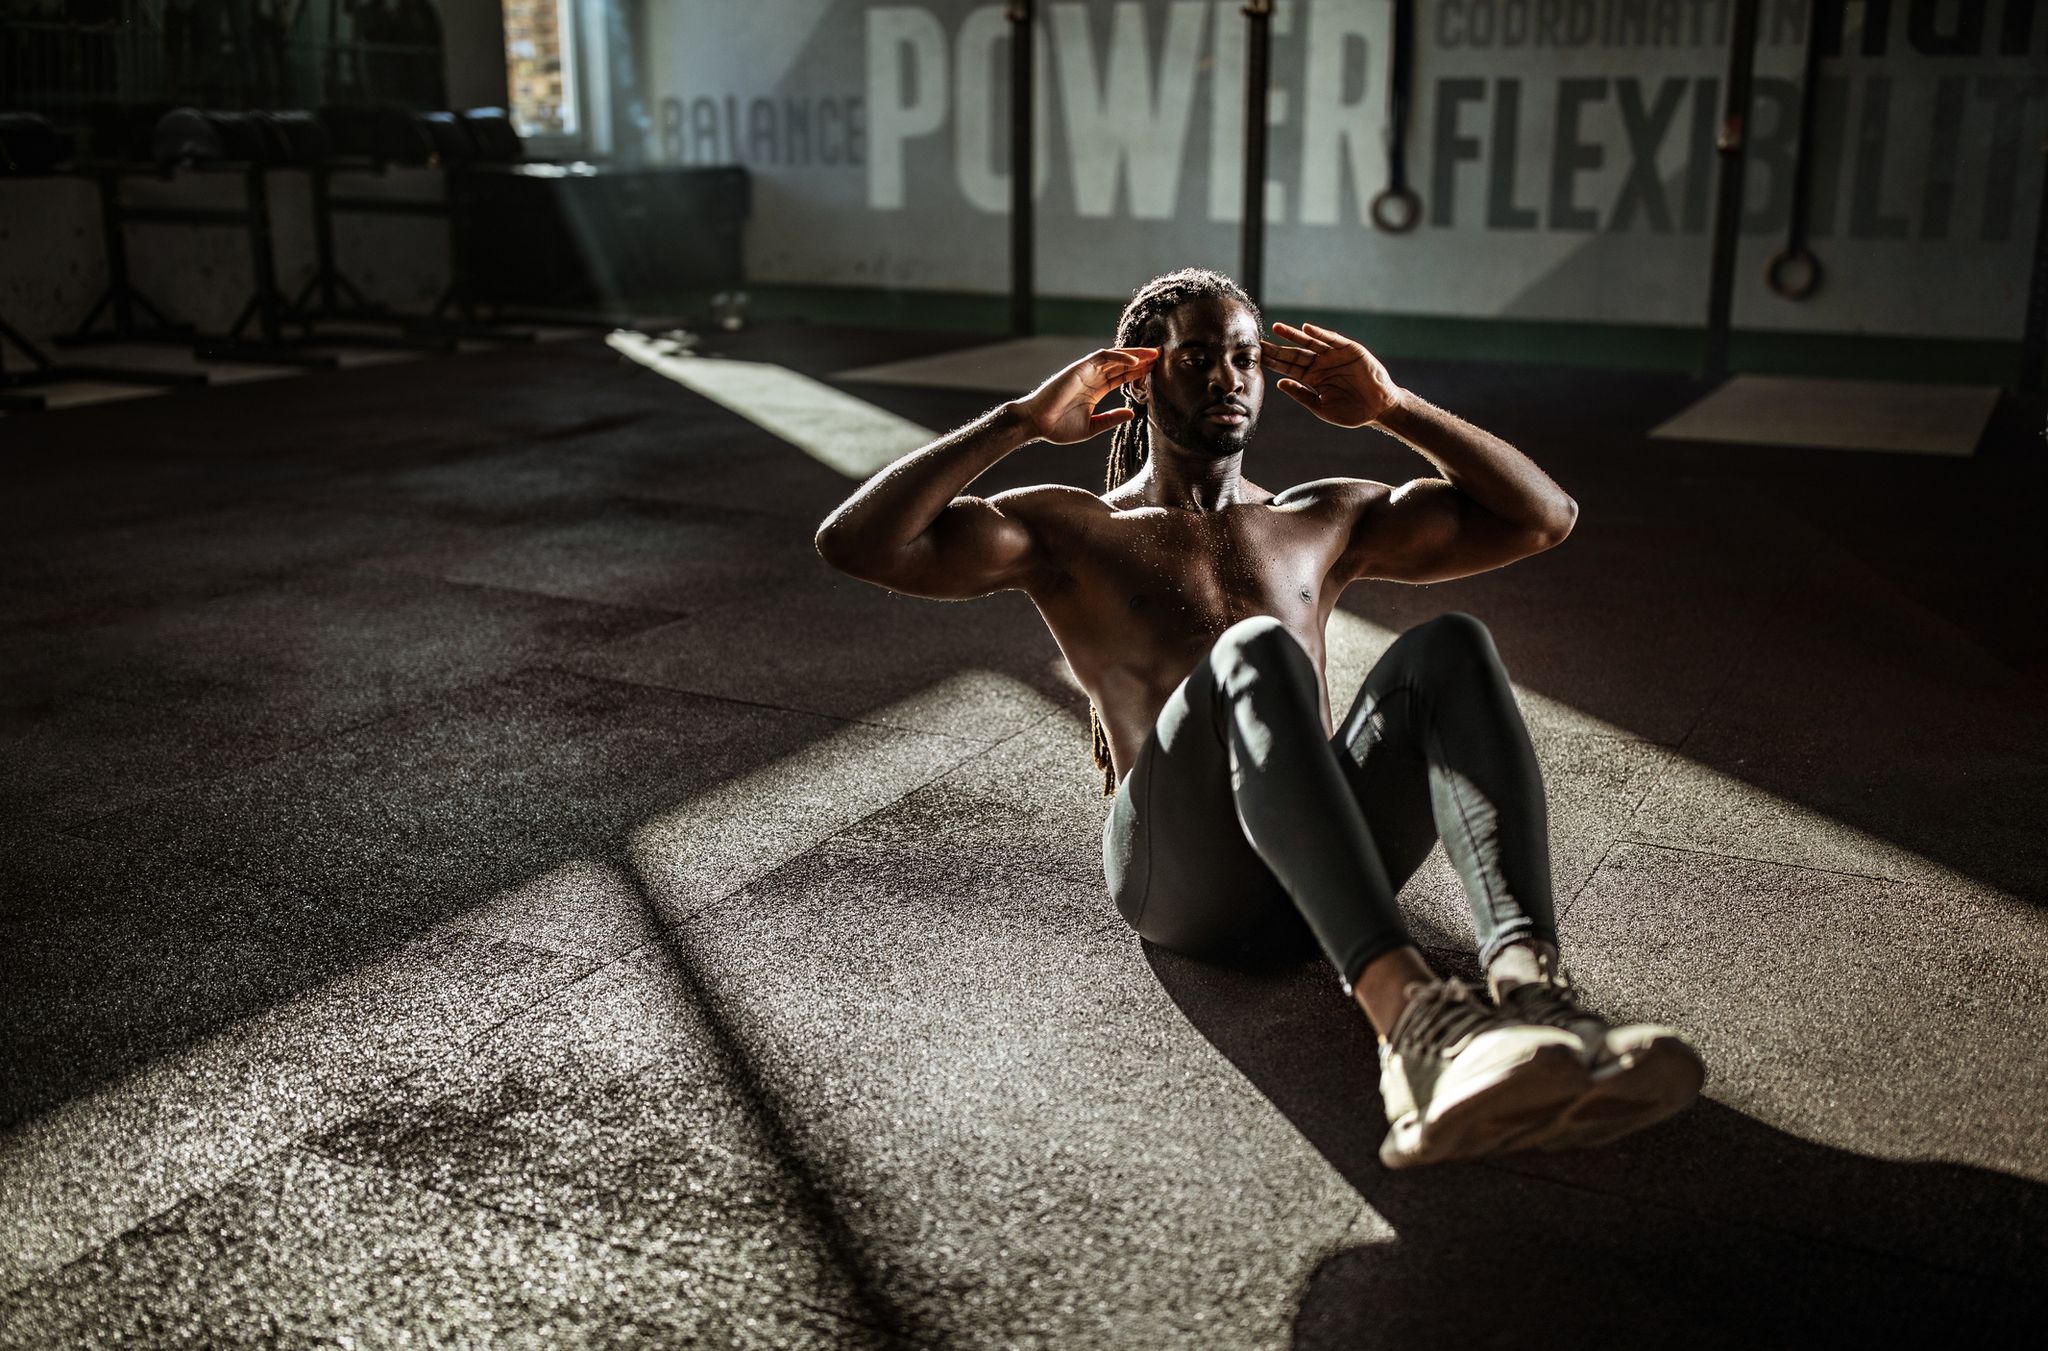 The 10-minute six-pack workout